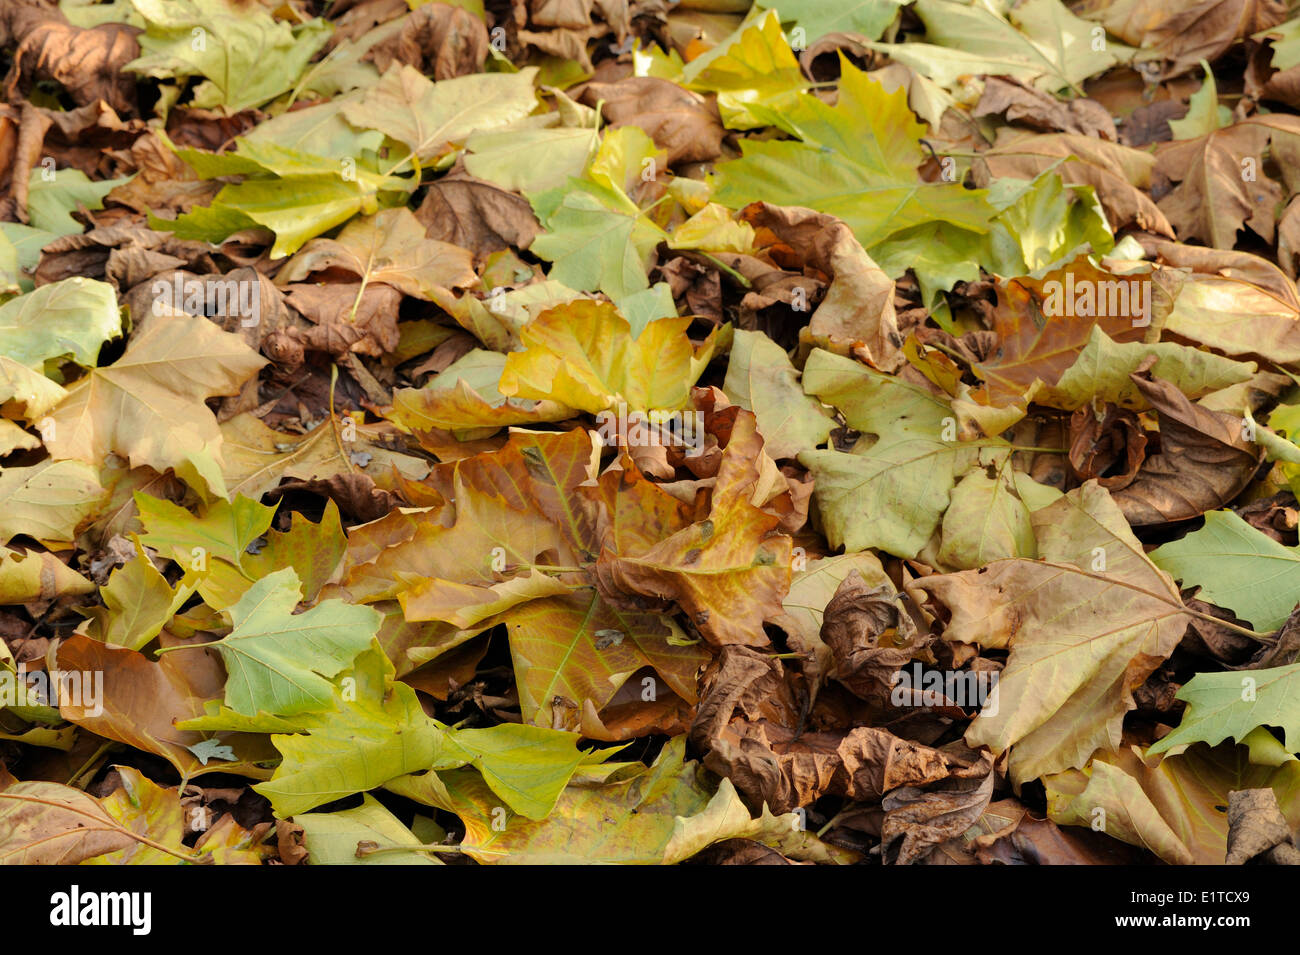 Fallen leaves of the Hybrid Plane laying on the ground Stock Photo